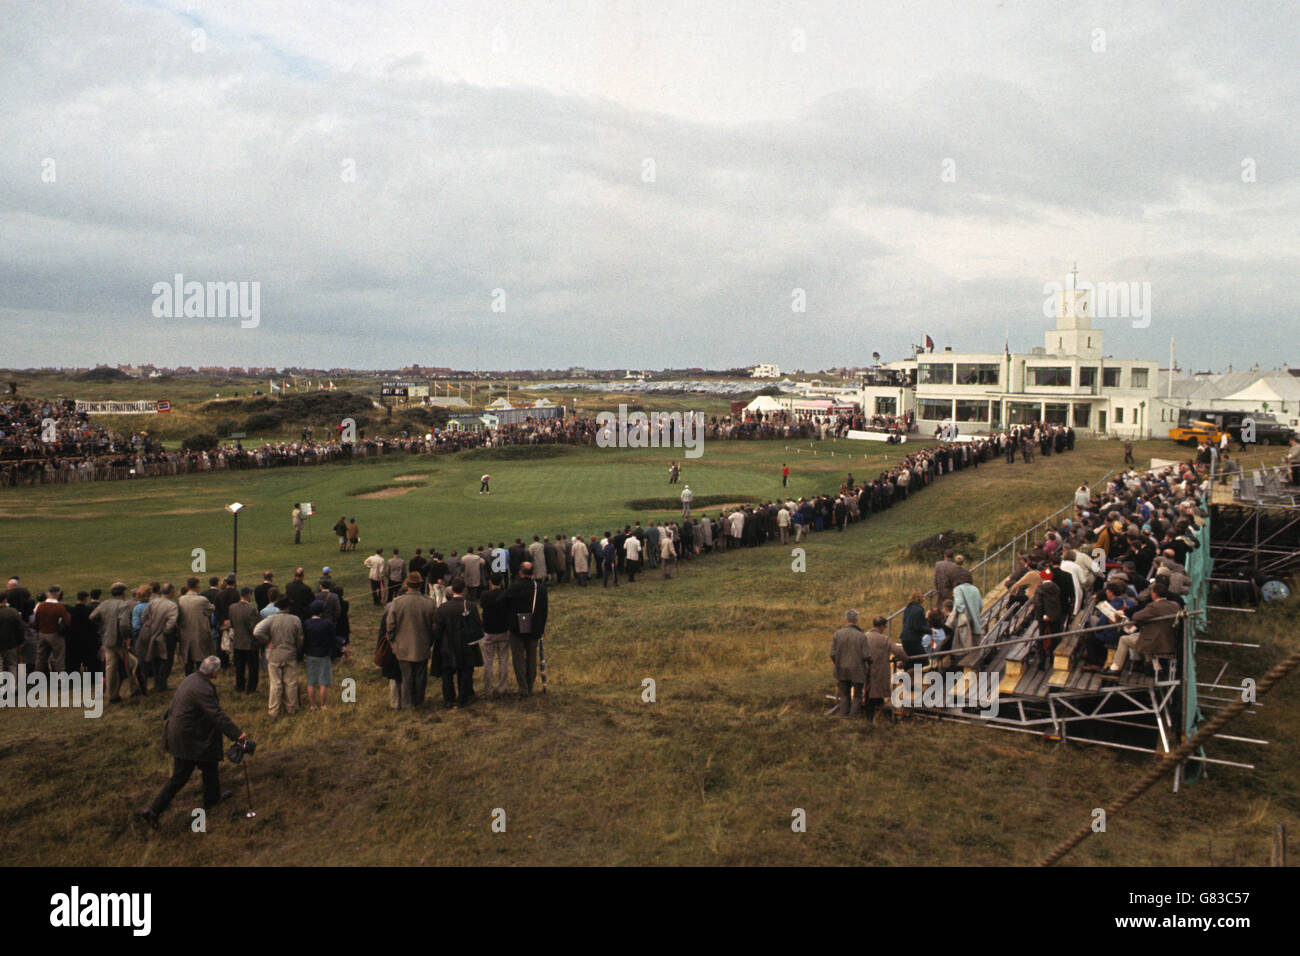 Golf - Carling World Golf Championship - Royal Birkdale Club. Fans gather round the 18th green during the Carling World Golf Championship at Royal Birkdale Club. Stock Photo